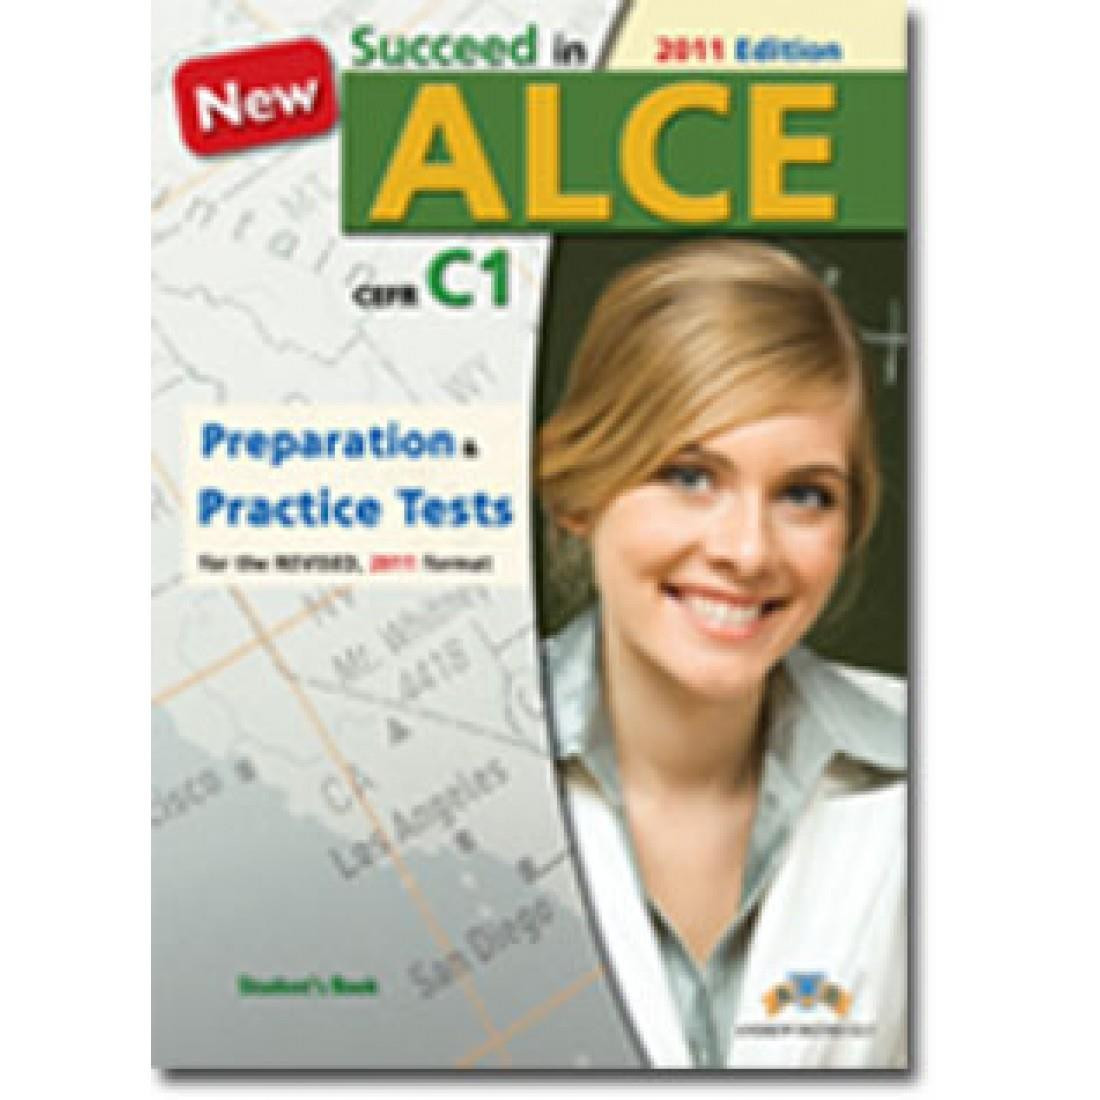 SUCCEED IN ALCE PRACTICE TESTS CD CLASS (3)